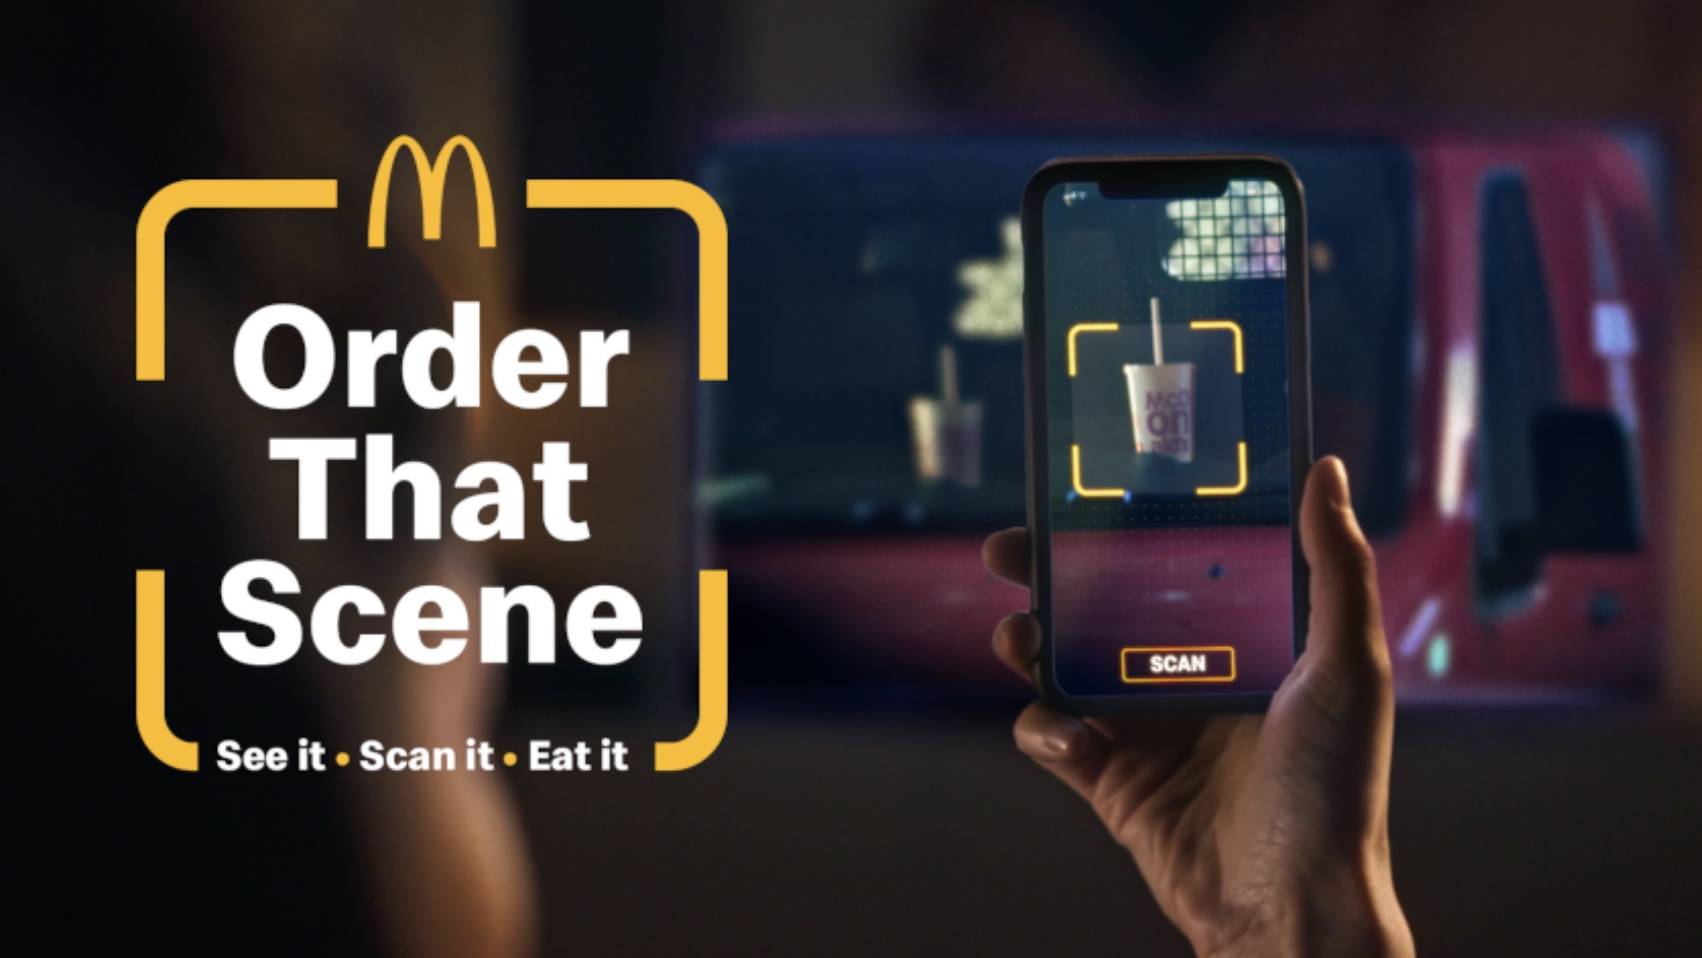 Image depicting a hand scanning to order McDonald's